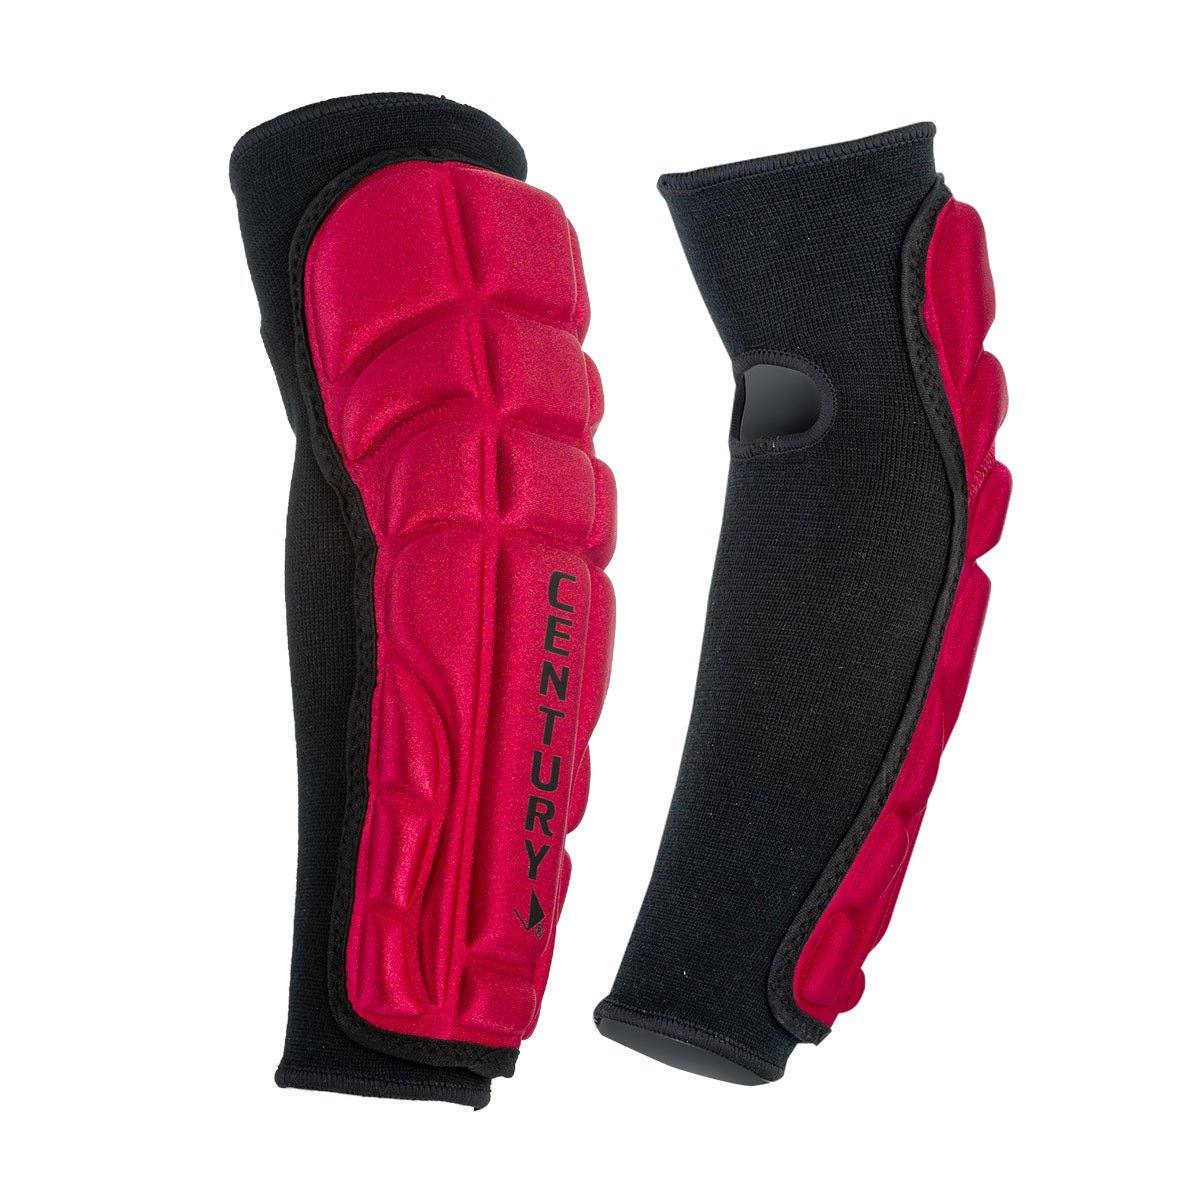 Victory Martial Arts Padded Arm Sleeves - Forearm Guards - Pair